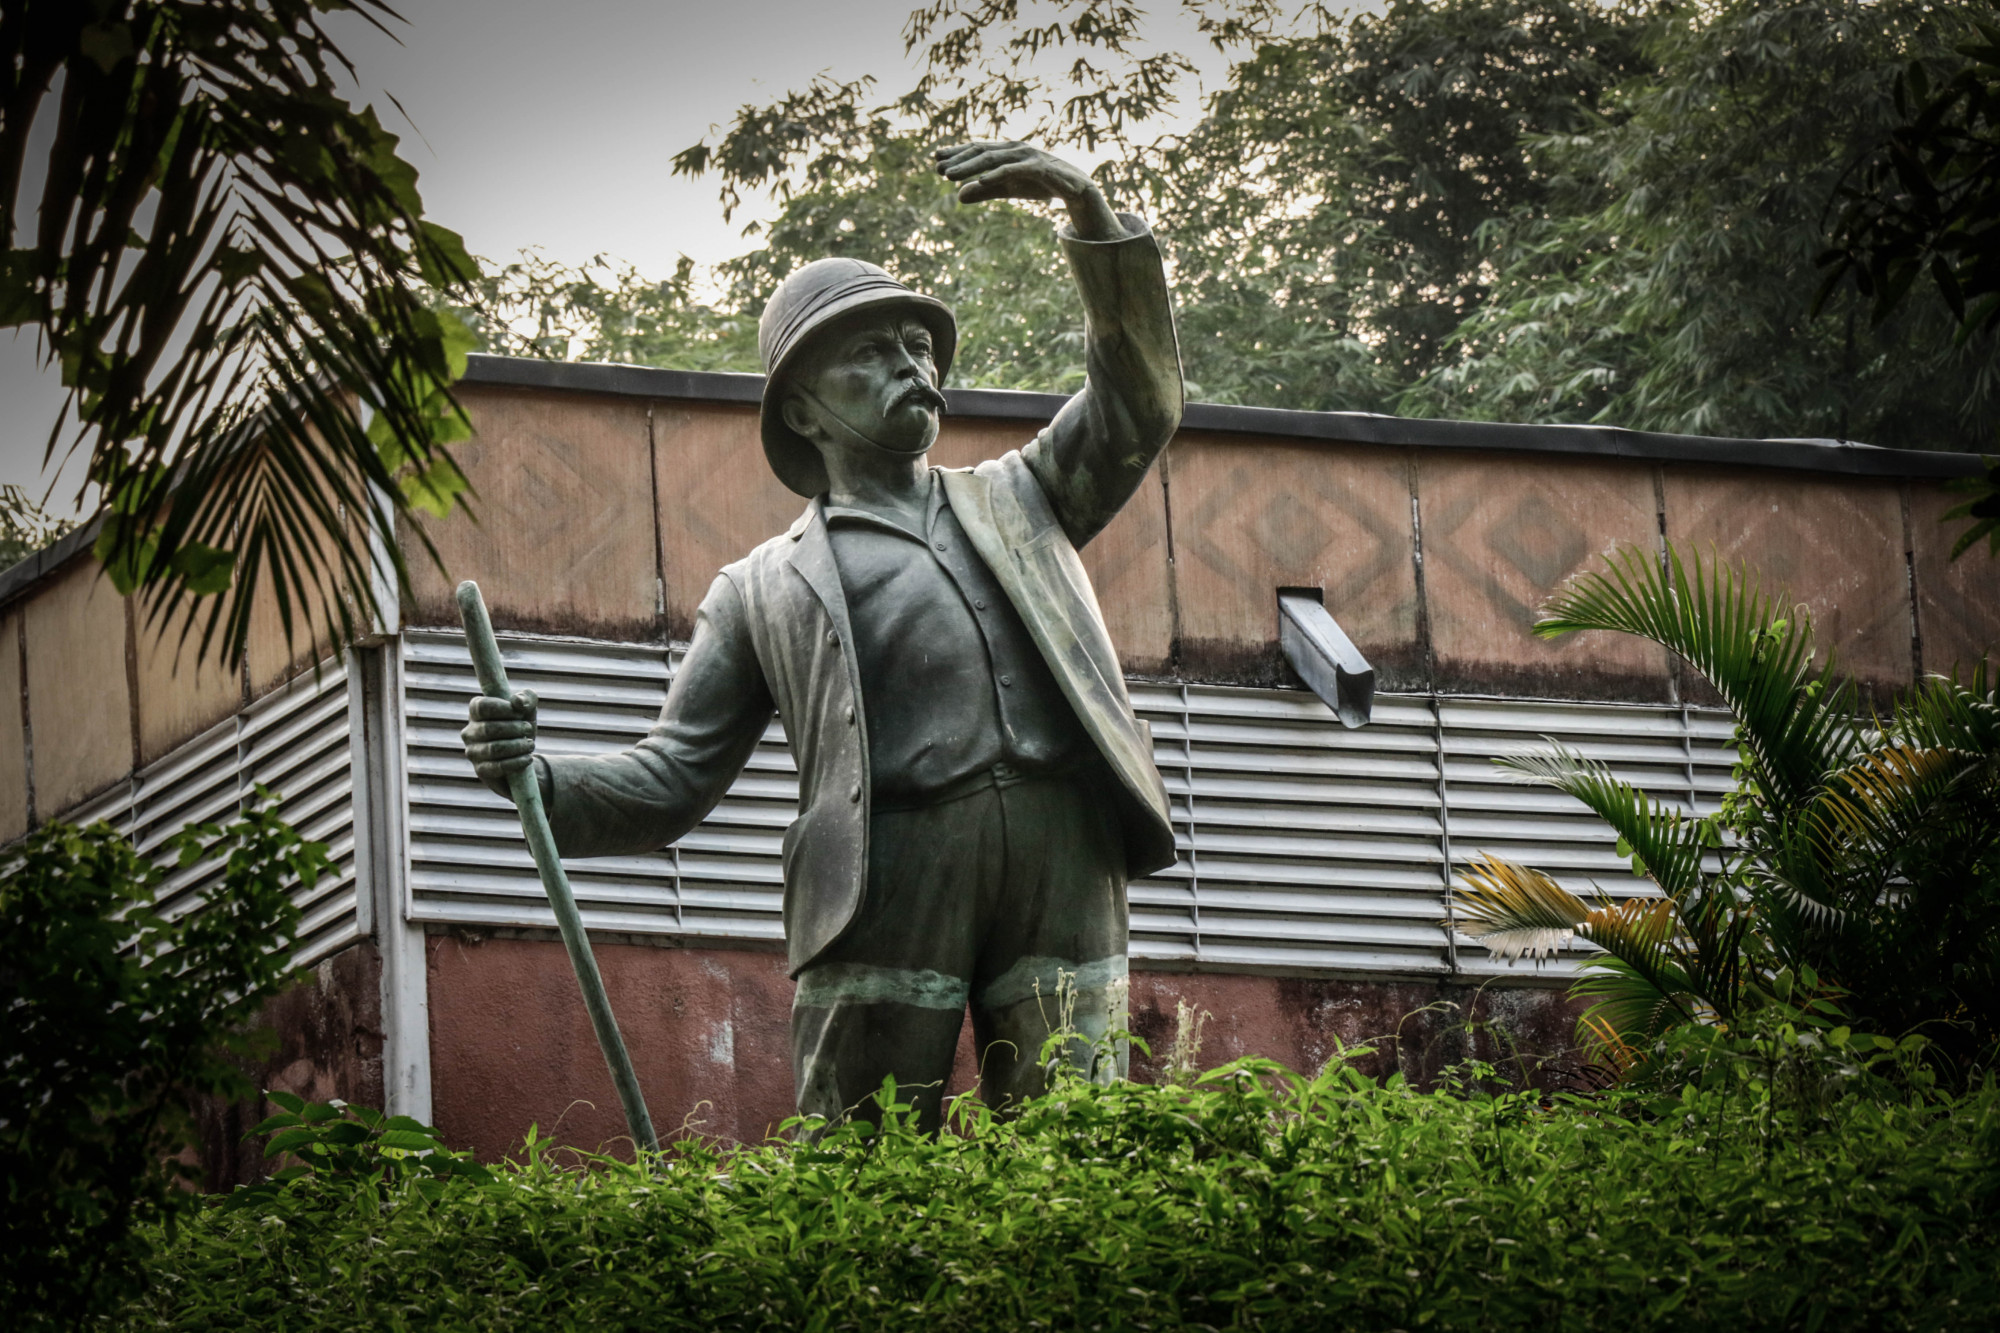 A statue of Henry Morton Stanley by Belgian sculptor Arthur Dupagne at the Institute of National Museums of Congo, in the Mont Ngaliema area of the capital Kinshasa last week. Welsh-born explorer and journalist Stanley was employed in 1879 by the crown prince of Belgium, Leopold II, to annex Congo on his behalf. The Stanley statue was first erected in 1956 near this location where he built his first post, but was taken down in 1971, cut off at the feet and left lying face up behind the building. It has recently been remounted as part of the museum grounds. © Justin Makangara for Fondation Carmignac. Kinshasa, Democratic Republic of Congo, June 2020